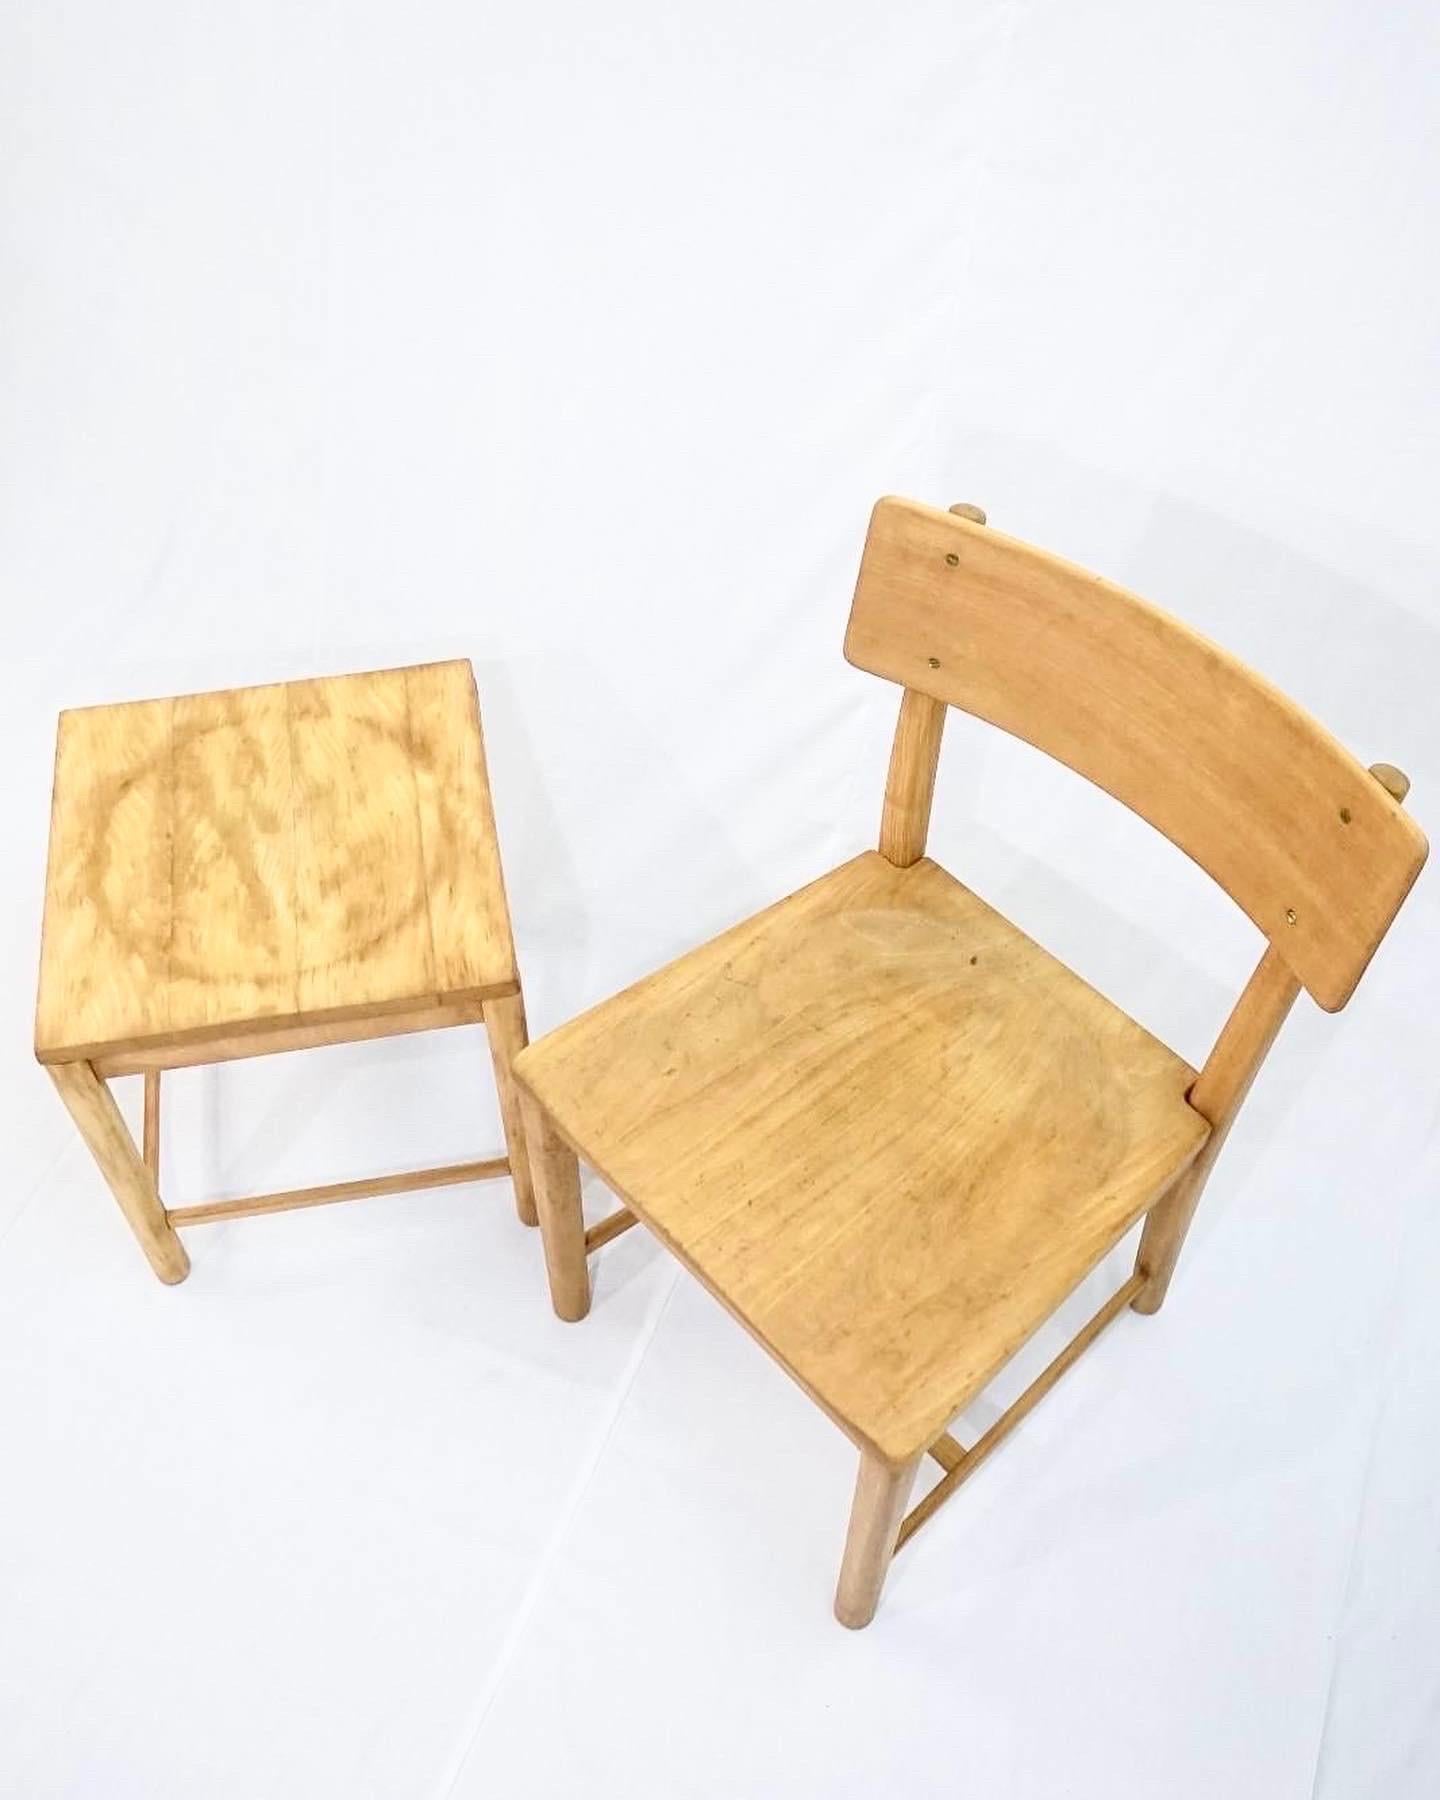 chairs and stools were important objects in traditional